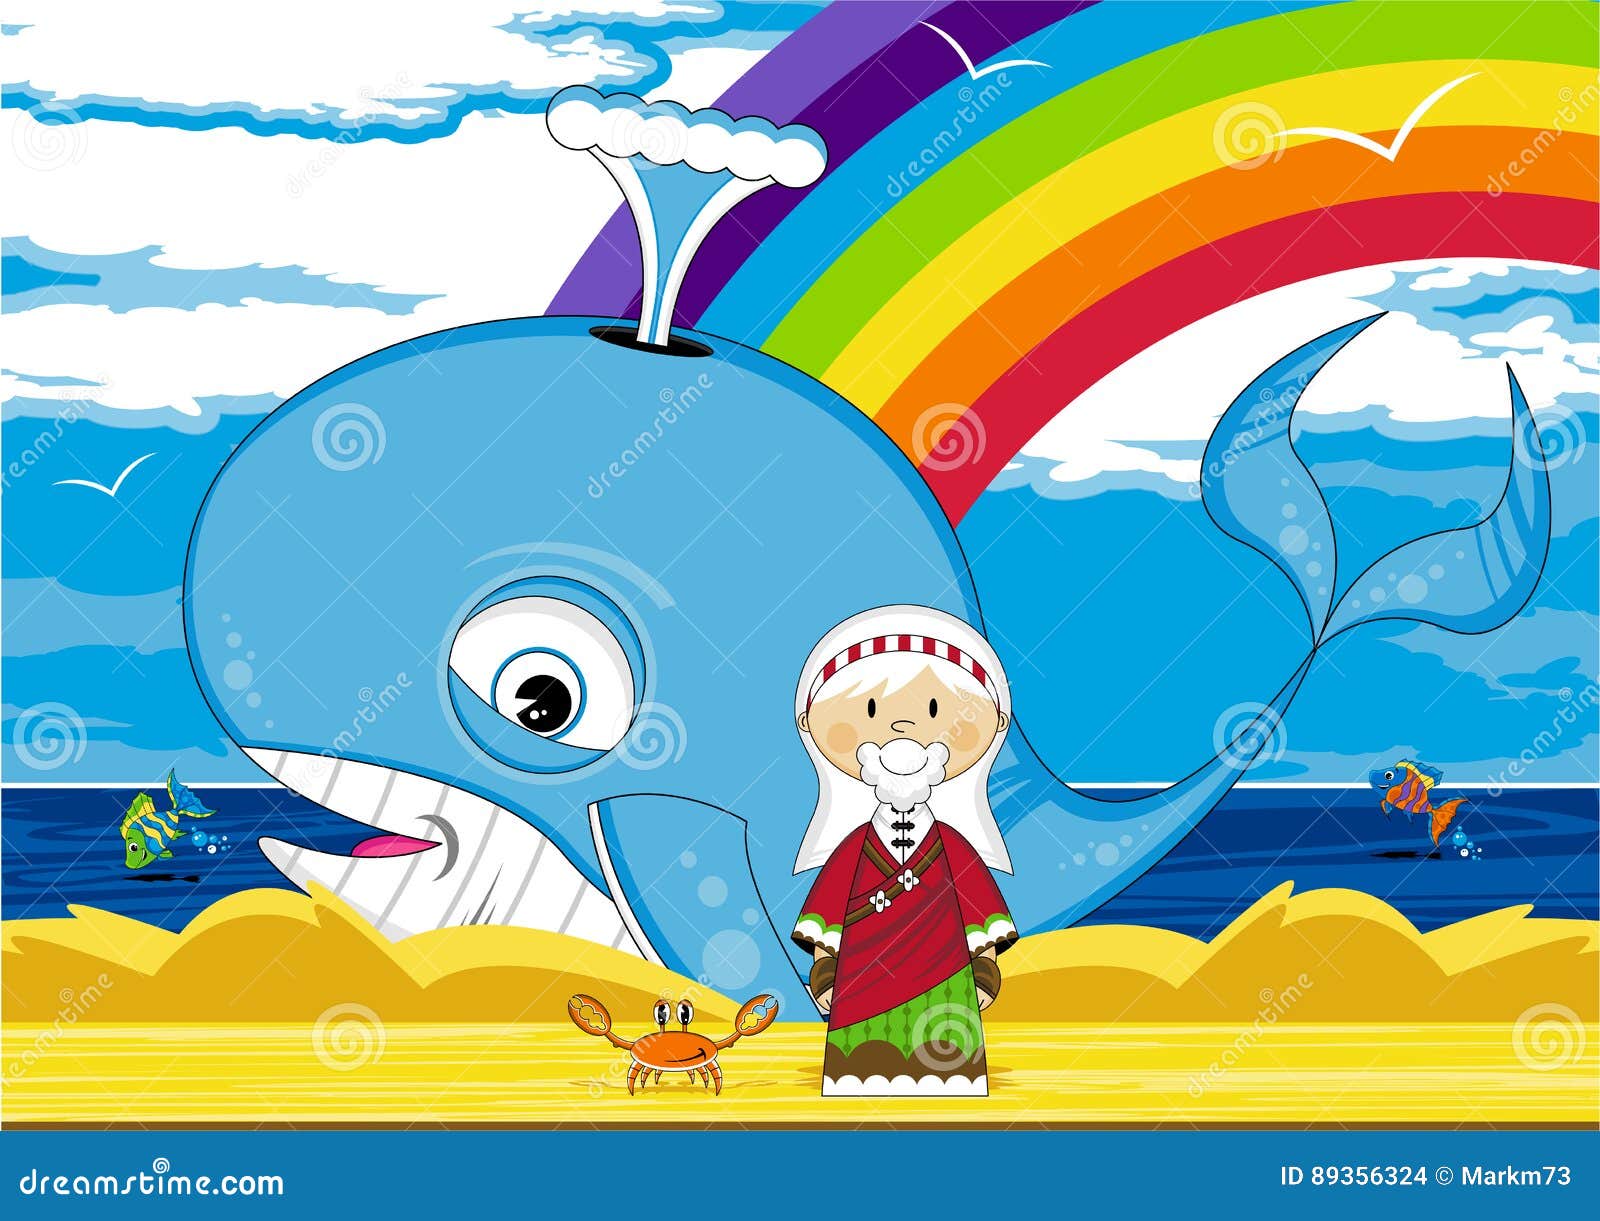 Jonah and pink whale